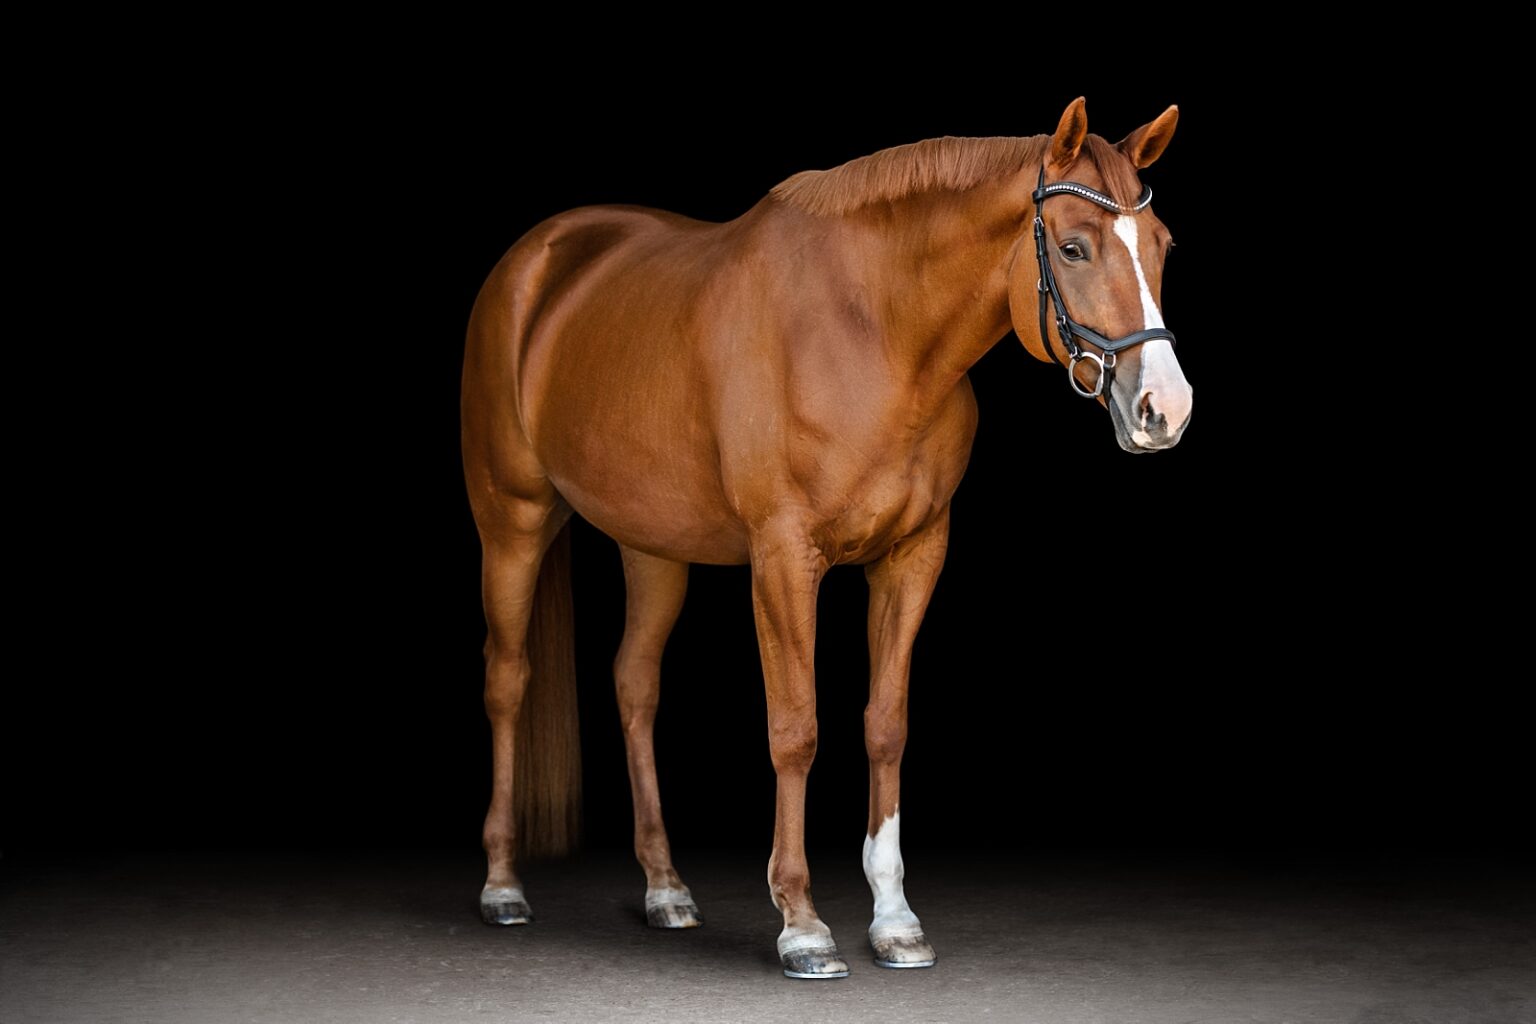 Tallahassee equine fine art by professional photographer. Chestnut warmblood mare on black background.